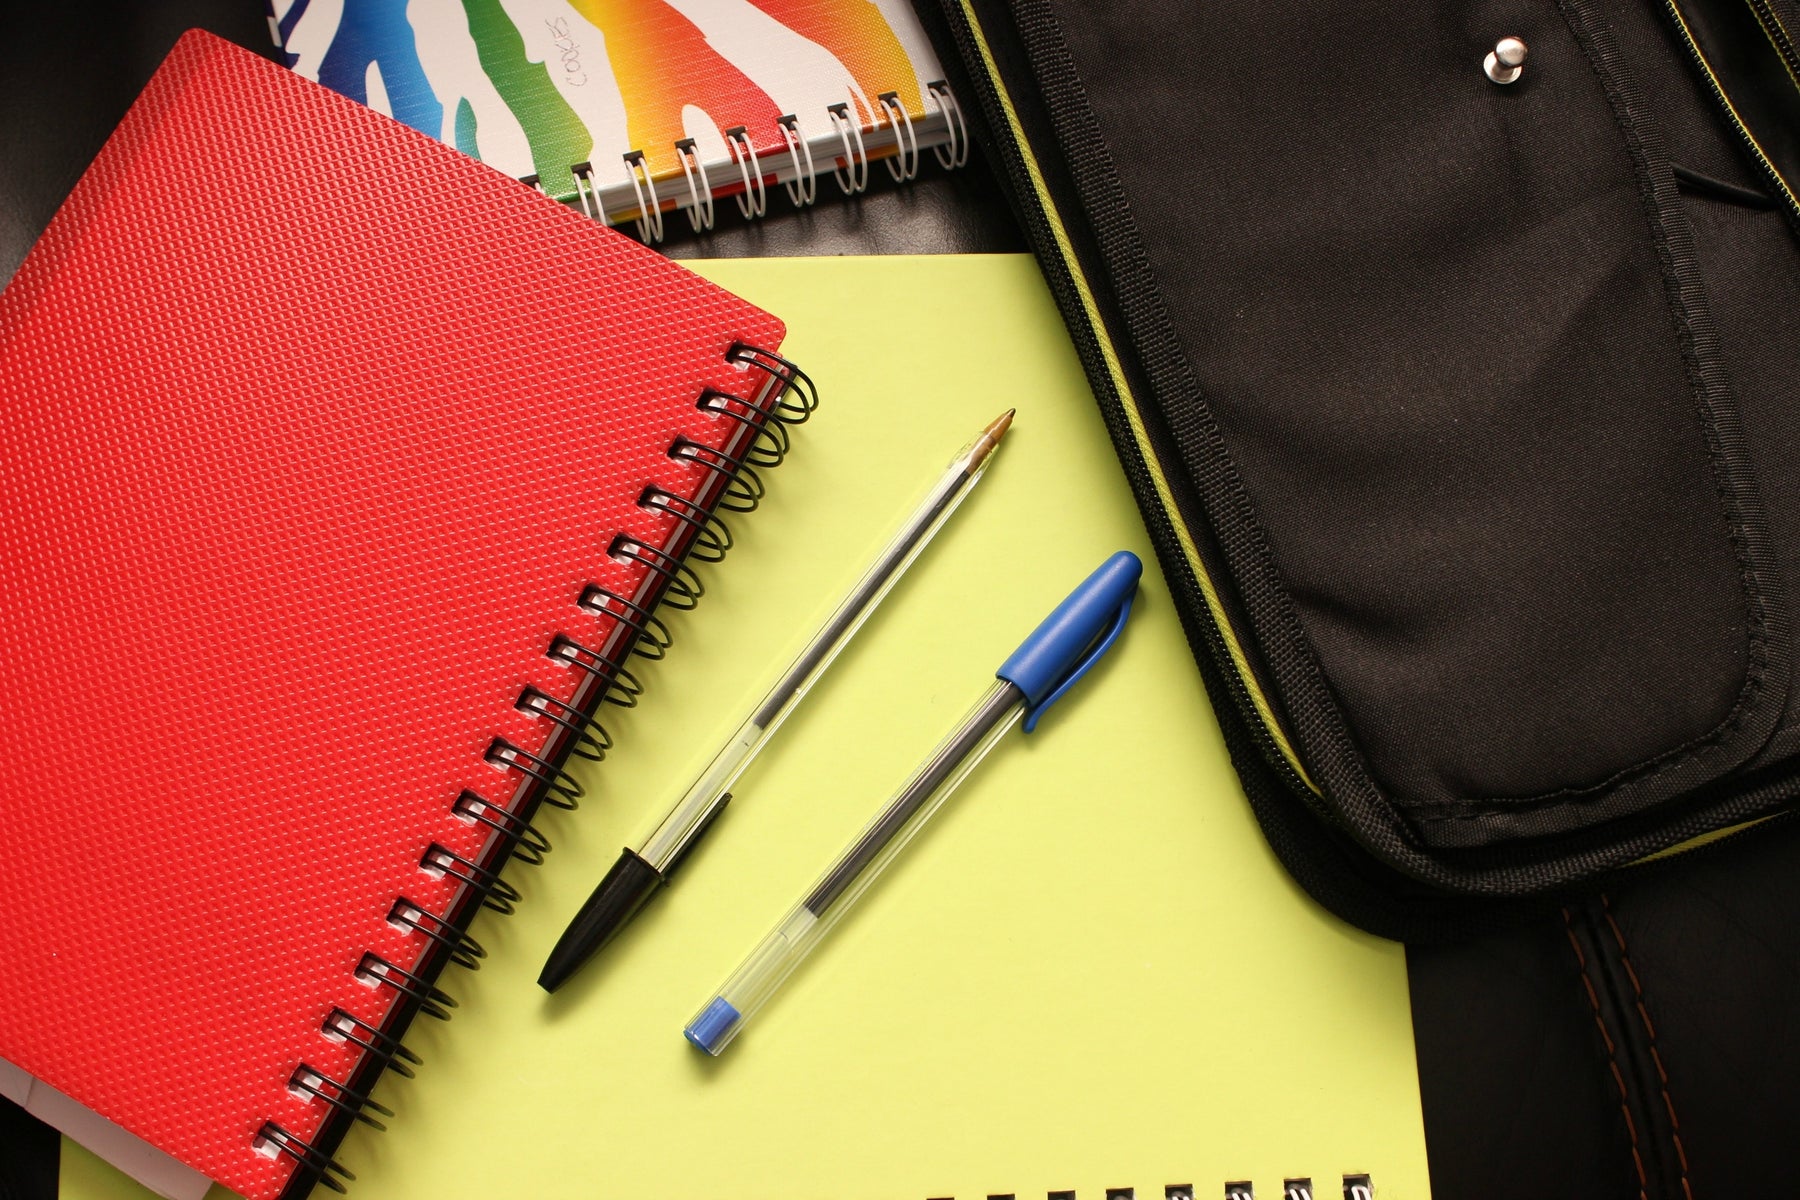 Get School Ready, These Supply Kits Will Get You There